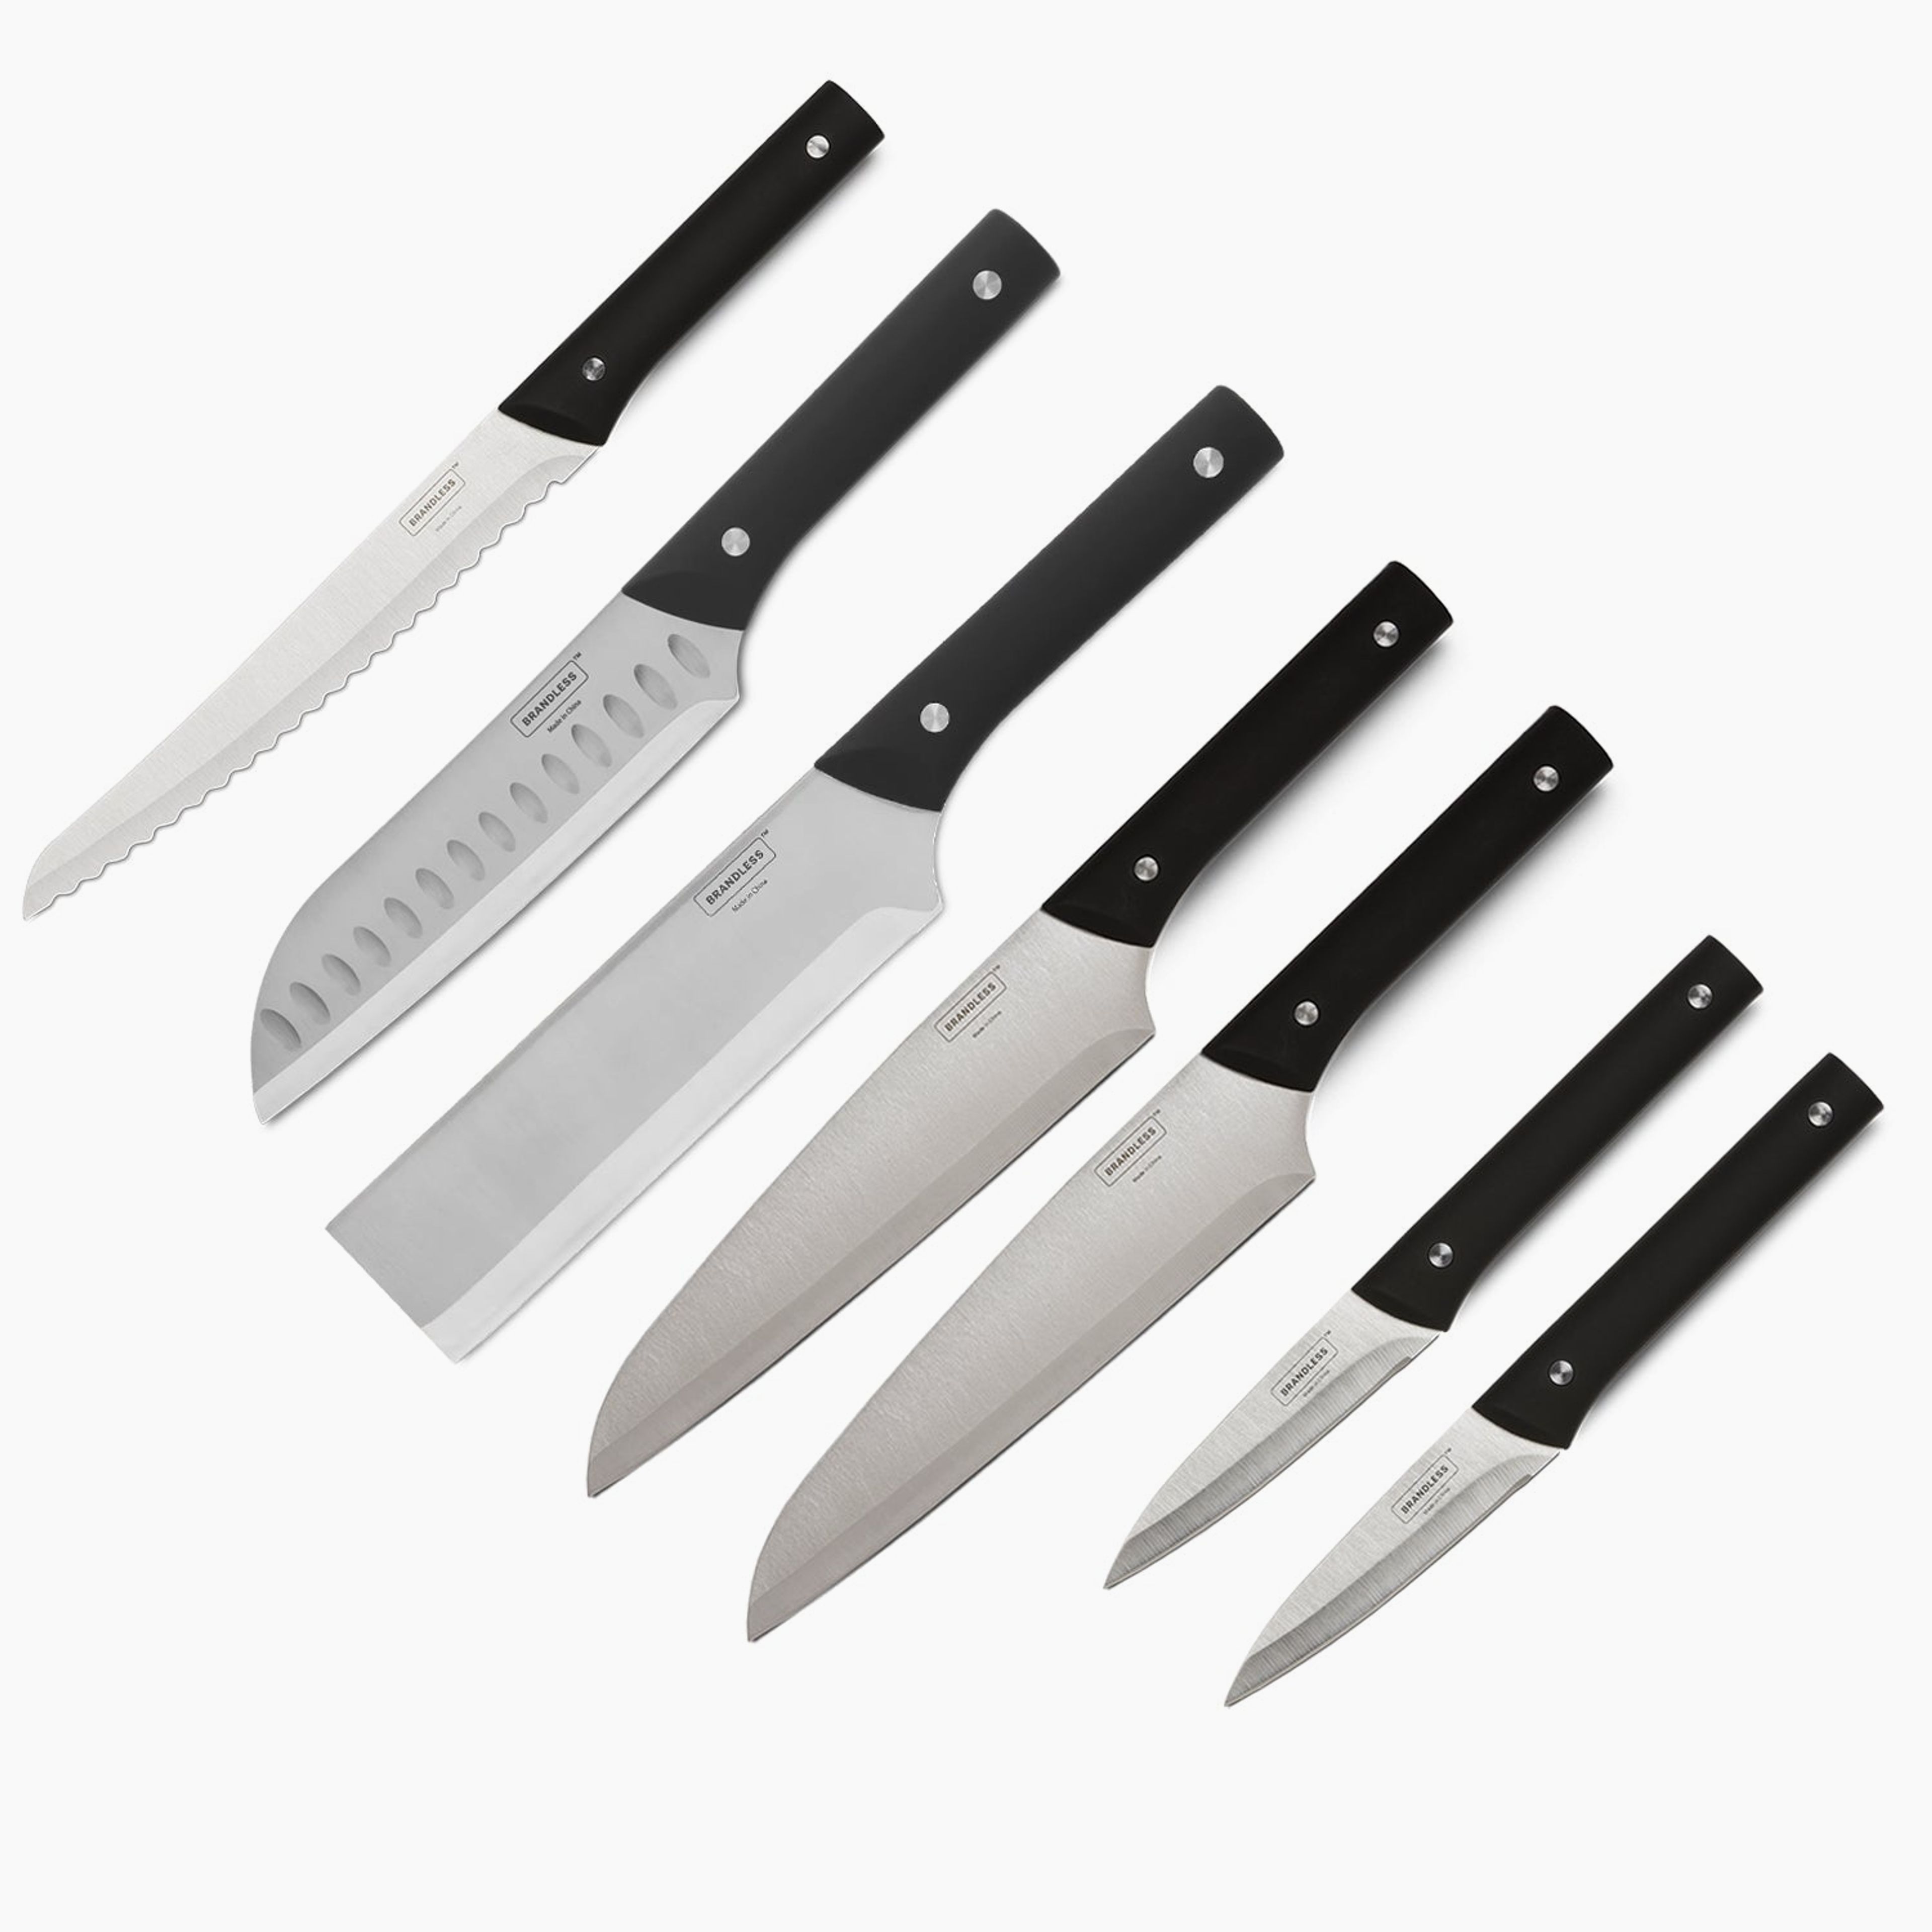 Just the Knives: Slice & Dice Set